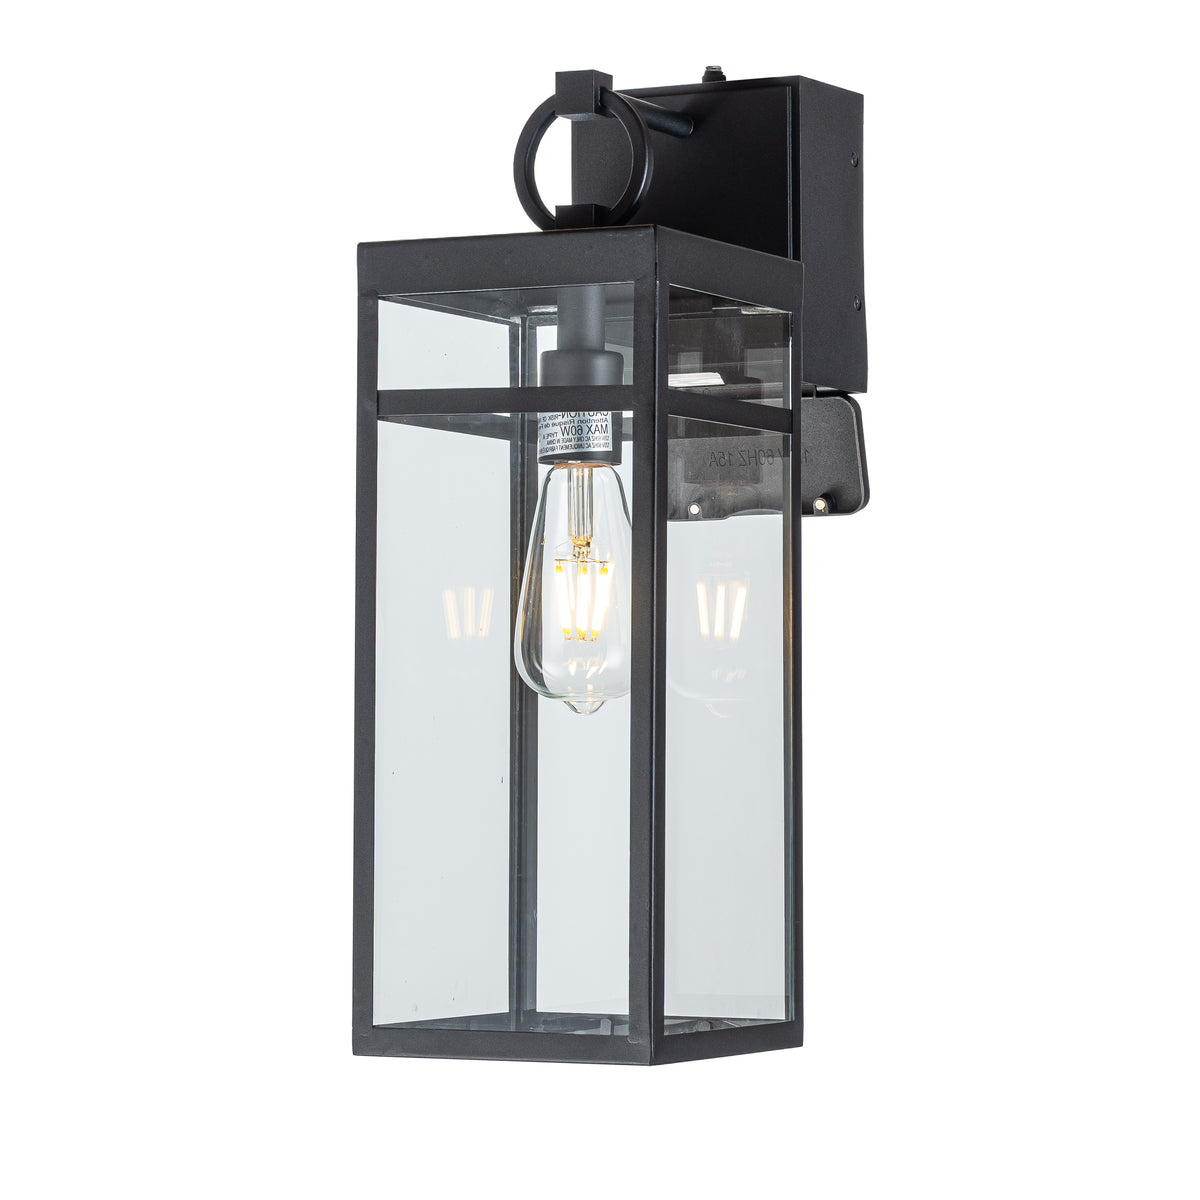 Dusk to Dawn Outdoor Wall Lantern with GFCI Outlets